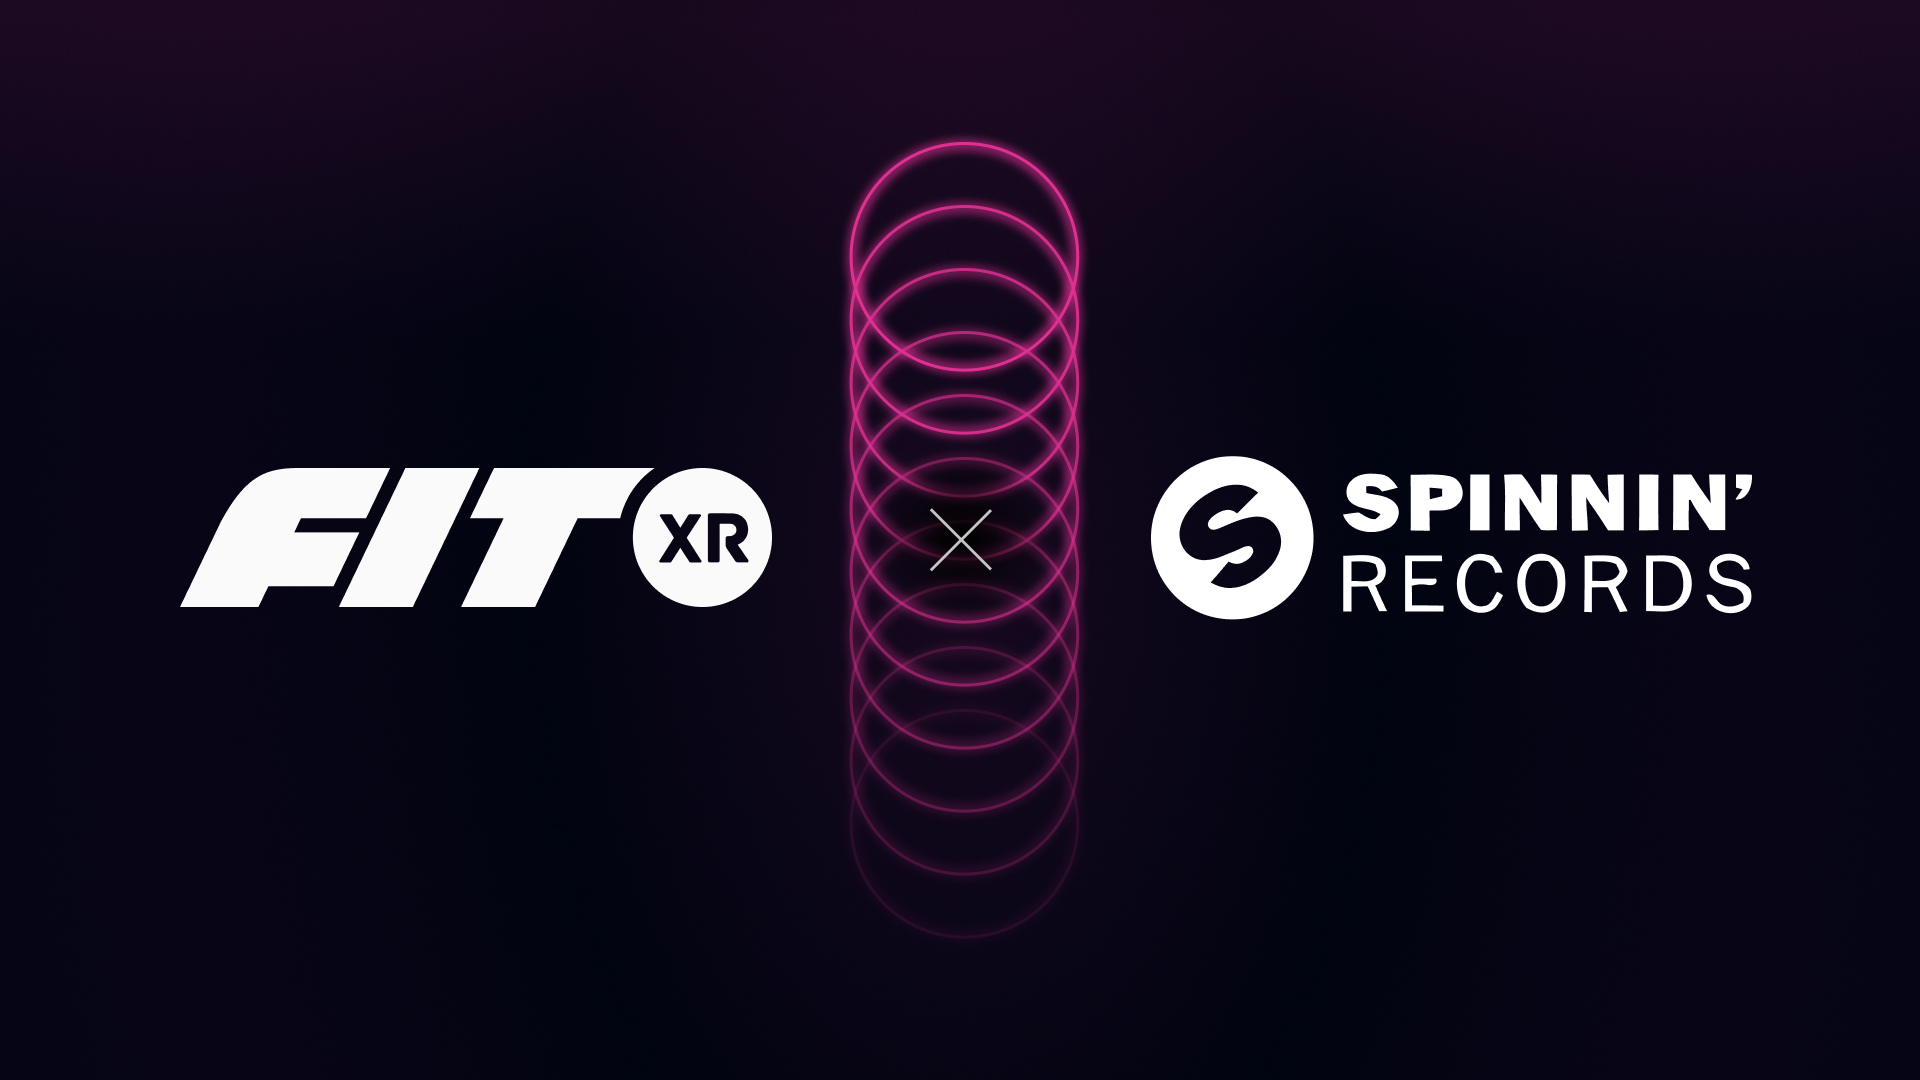 START YOUR FITNESS JOURNEY WITH SPINNIN' RECORDS TRACKS IN THE NEW FITXR  'FIND YOUR FIT' PROGRAM!, News